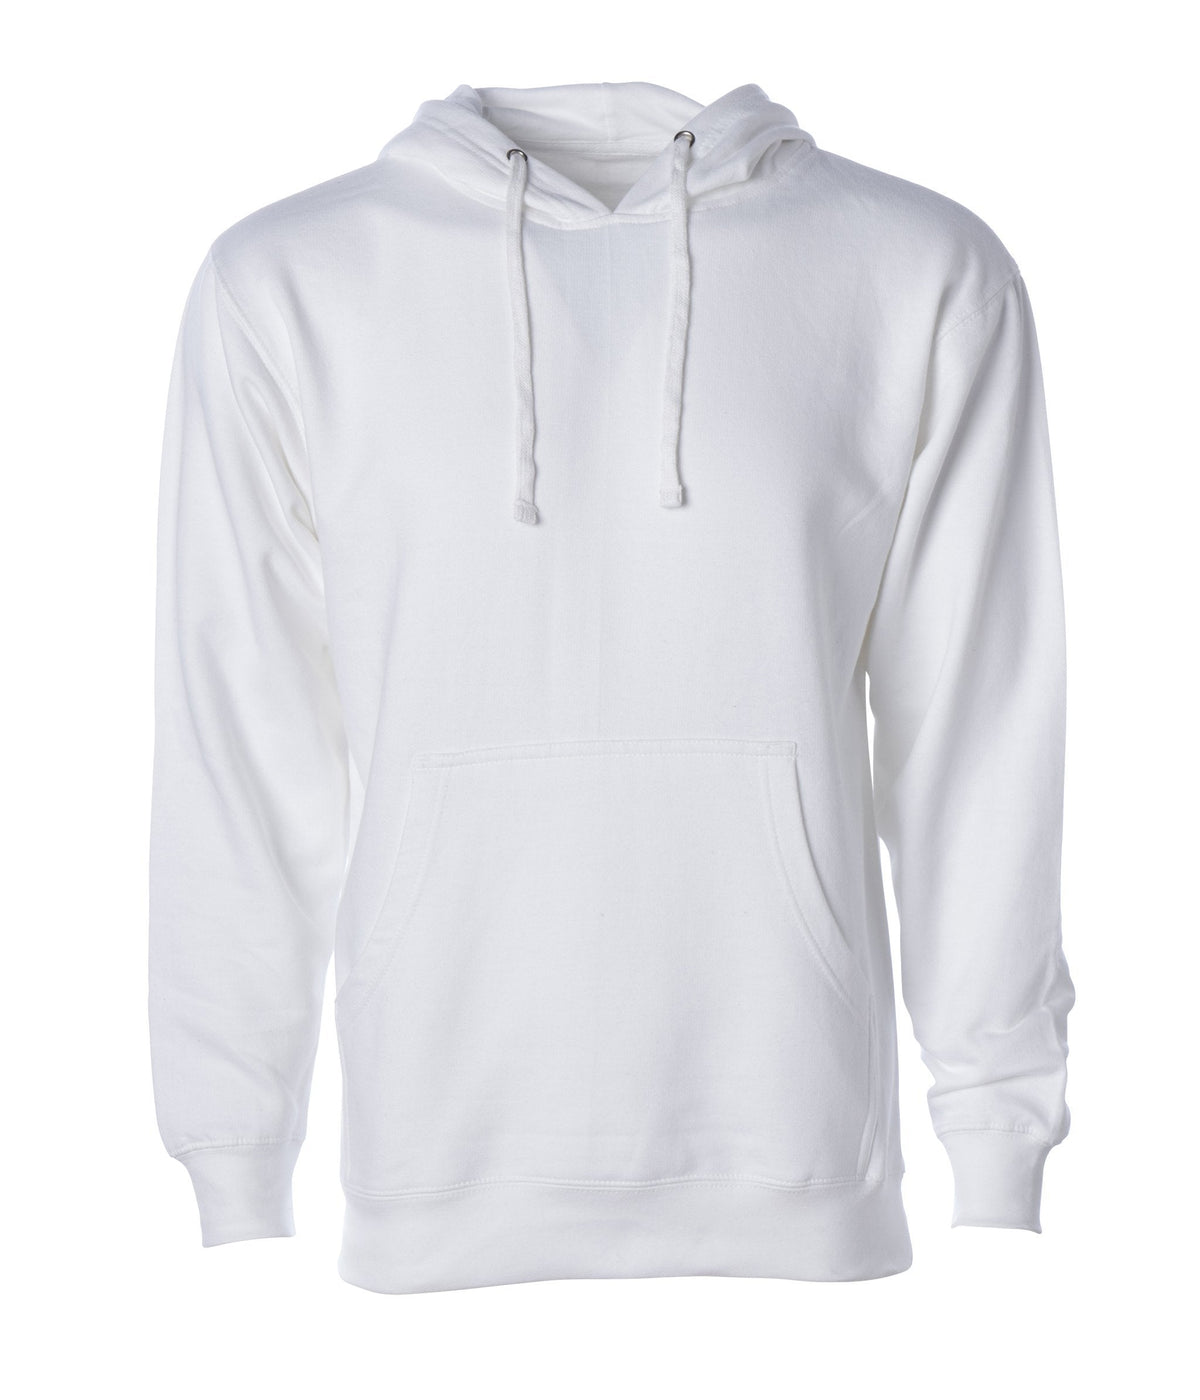 SS4500 Midweight Hooded Pullover Sweatshirts